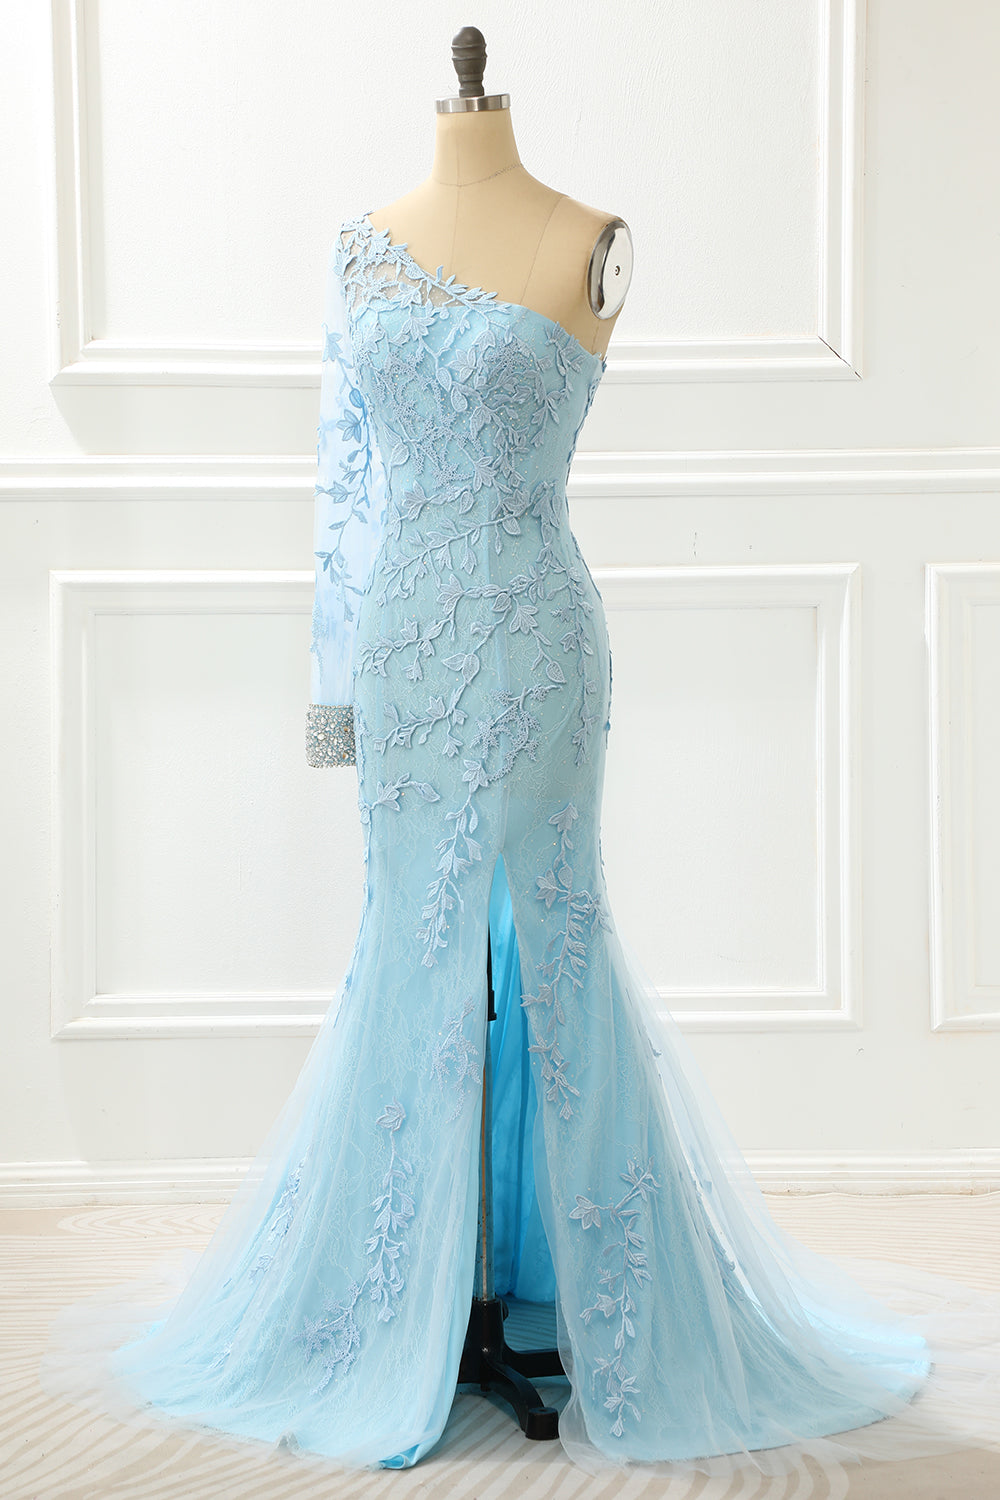 Prom Dress Red, One Shoulder Sky Blue Mermaid Prom Dress With Appliques